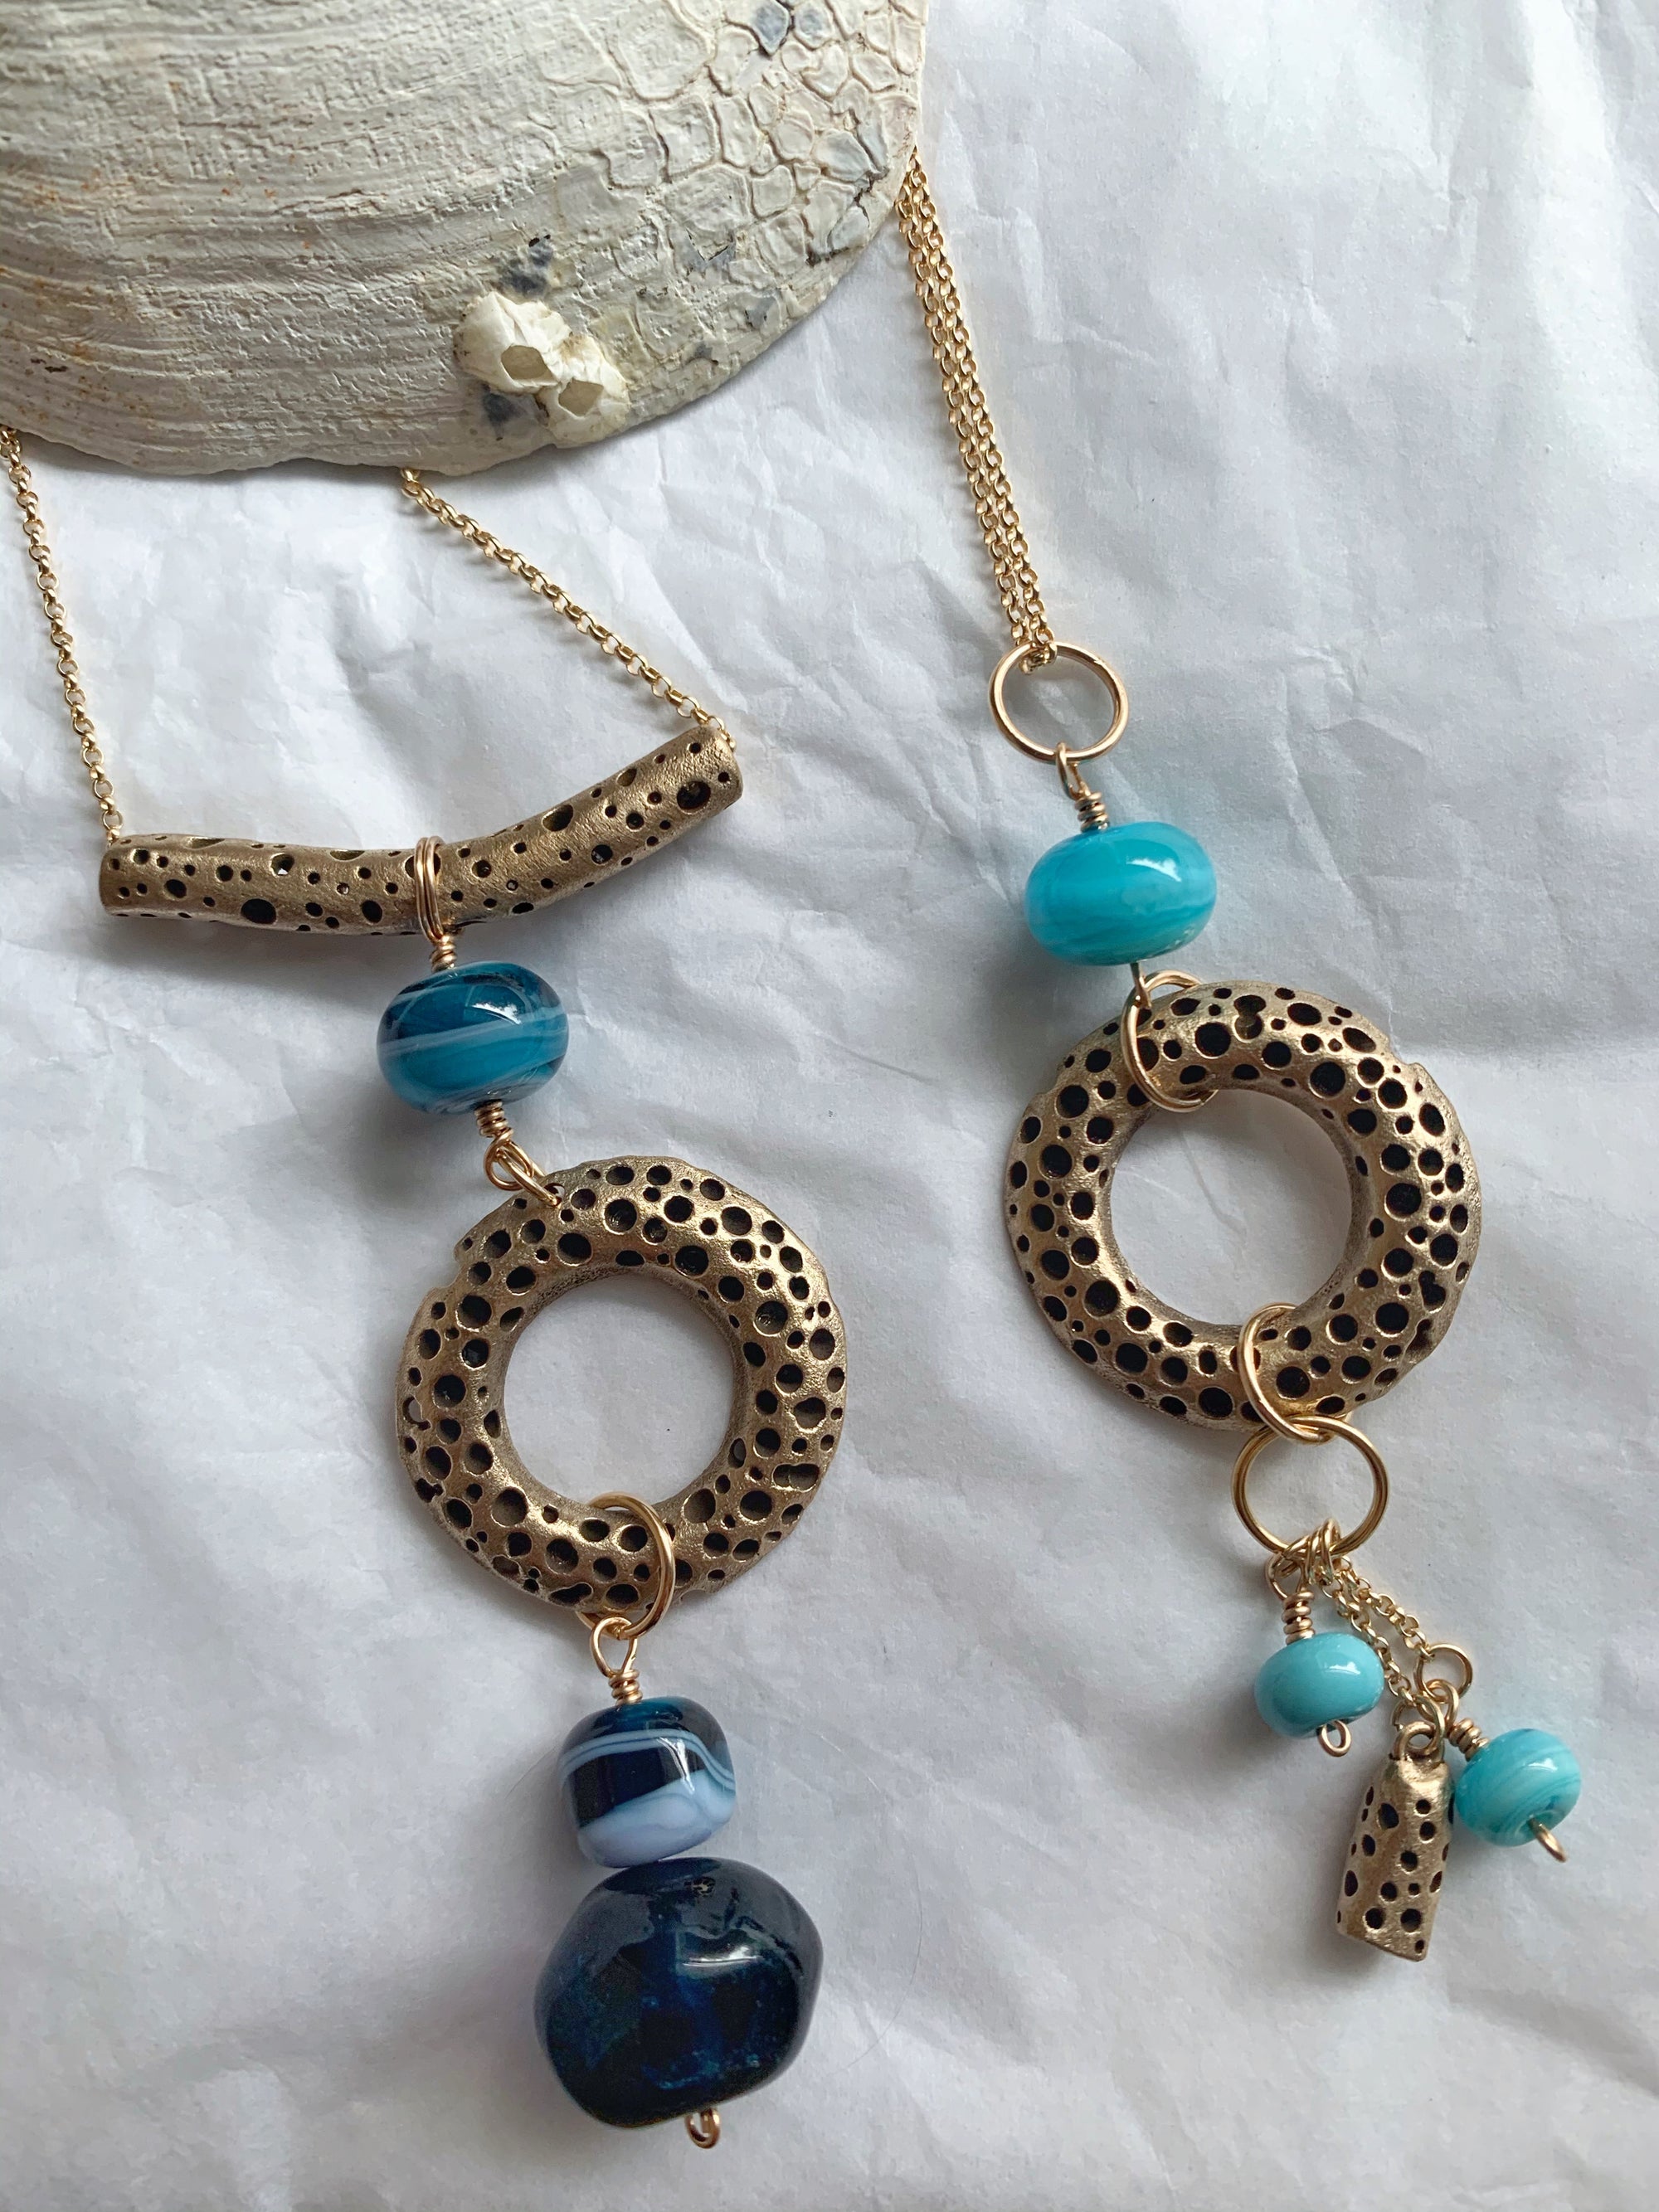 Bronze and glass artisan made statement necklaces